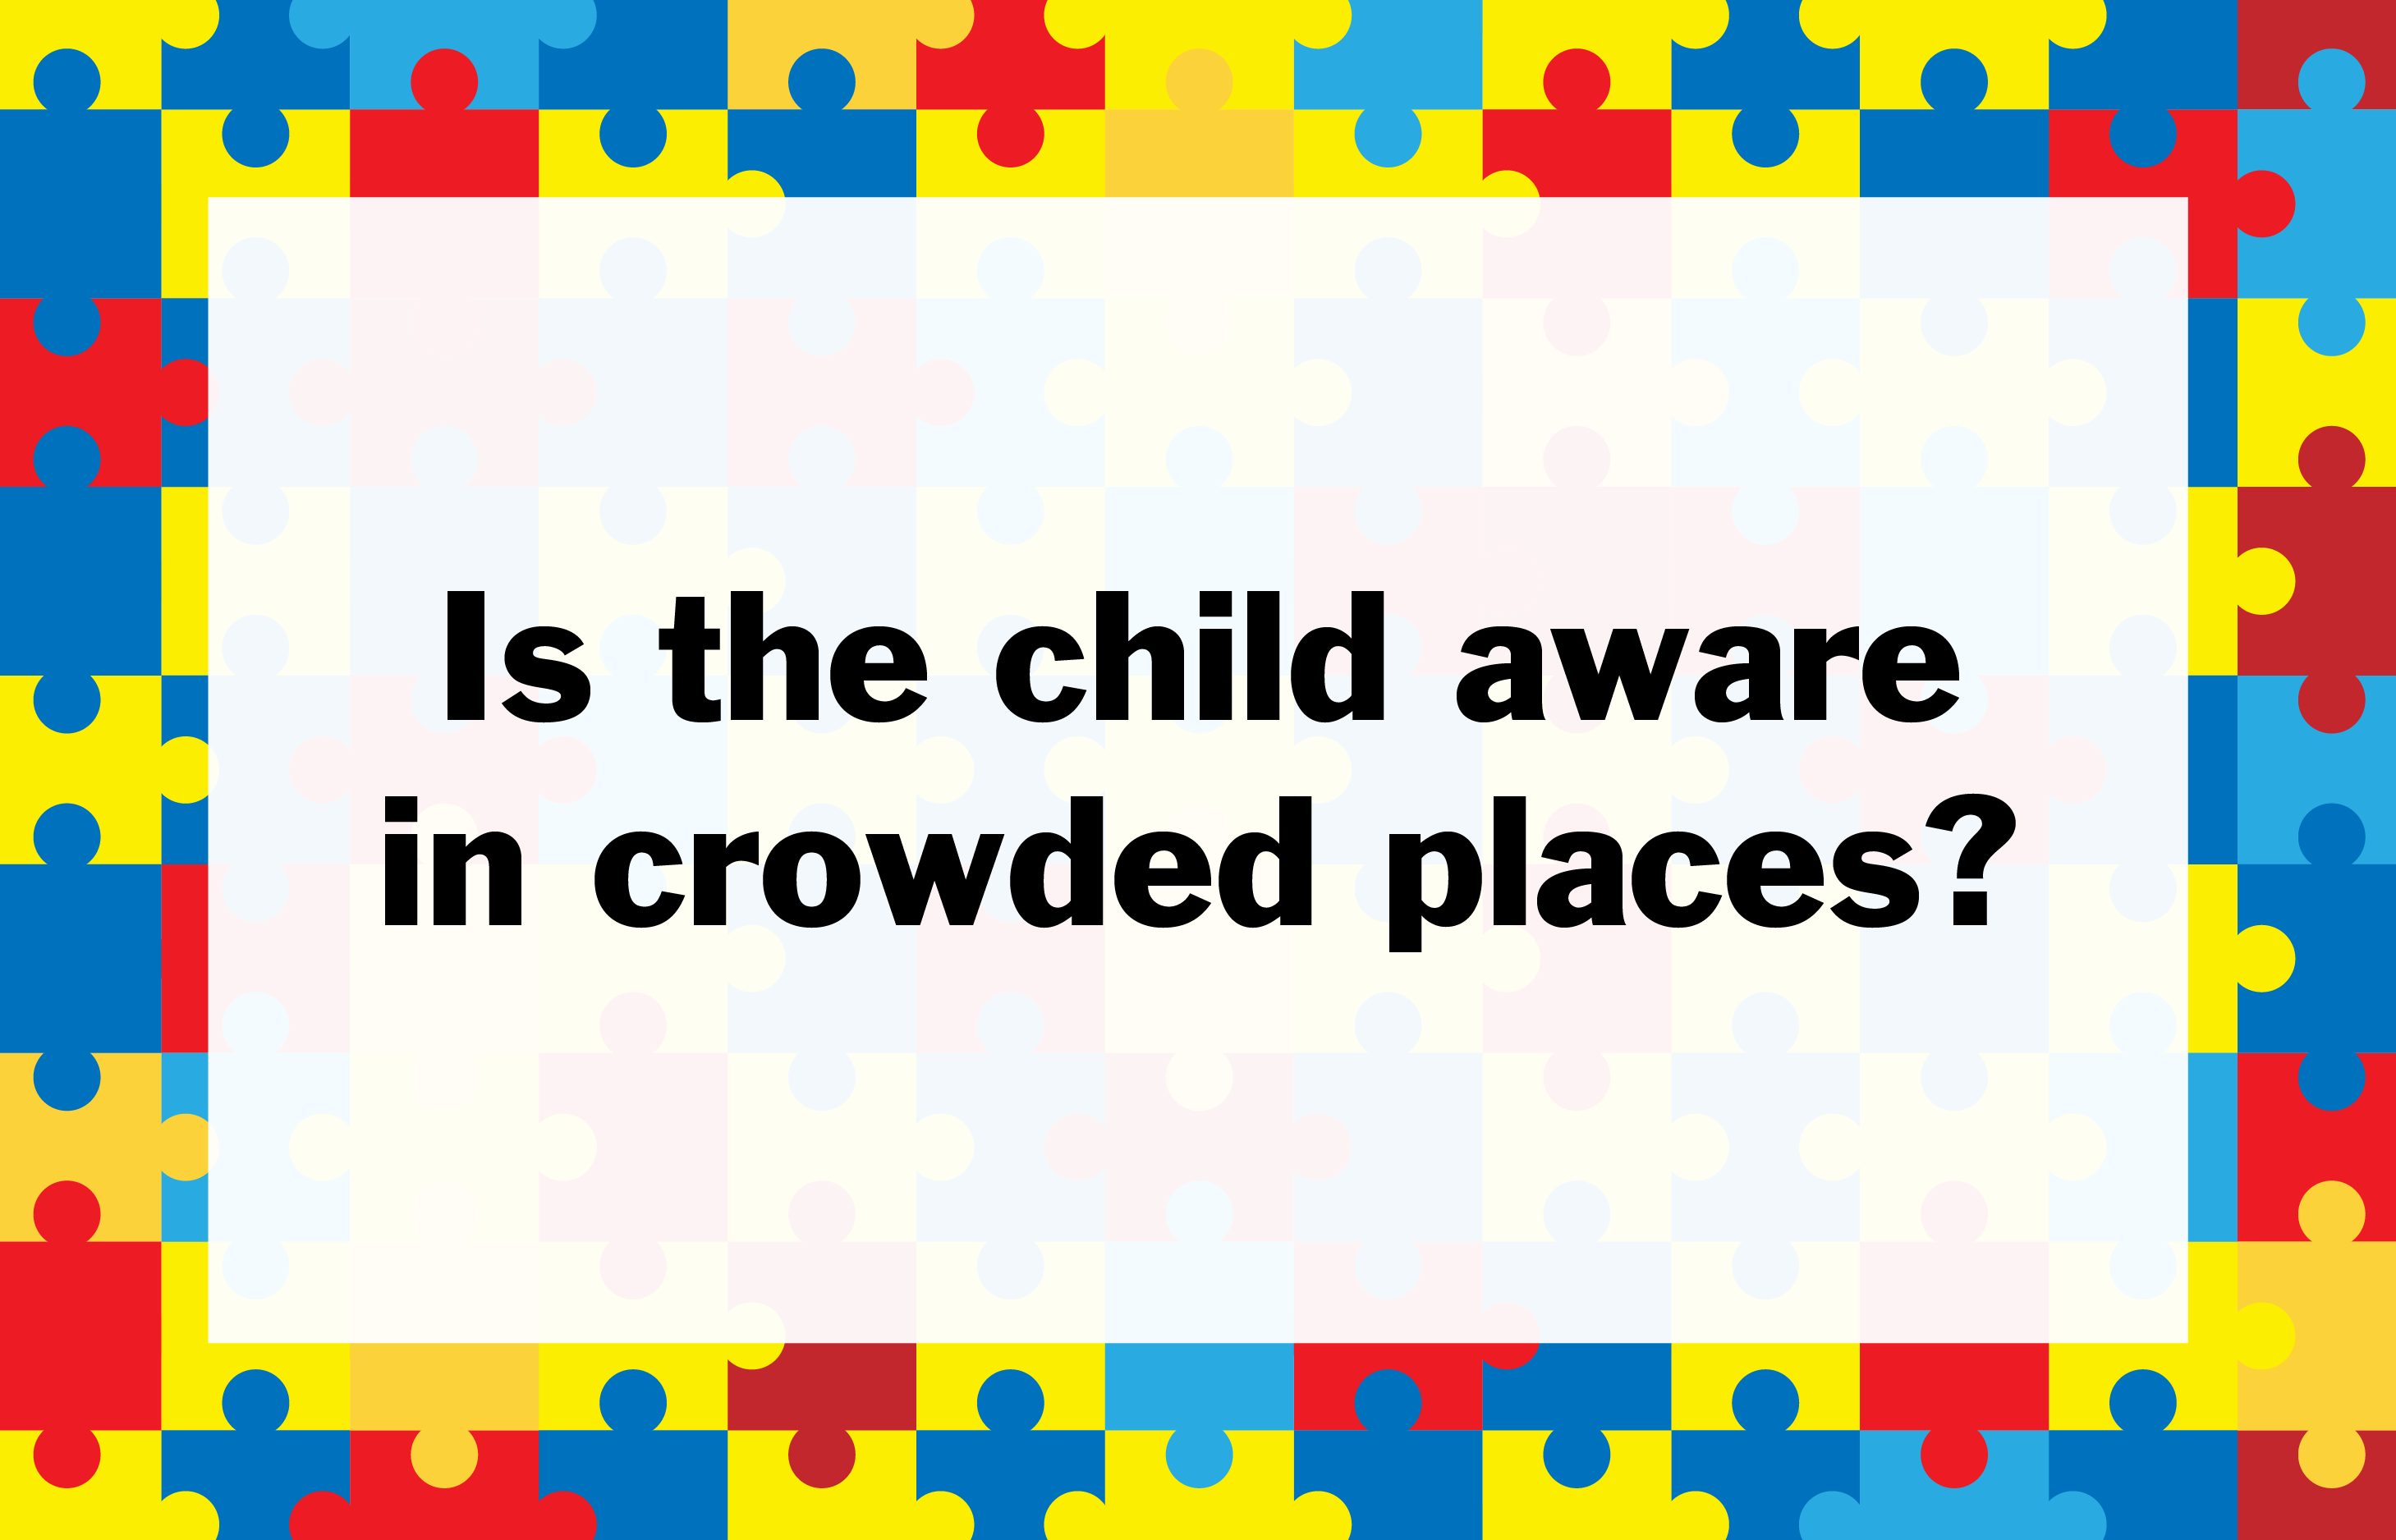 Is the child aware in crowded places?